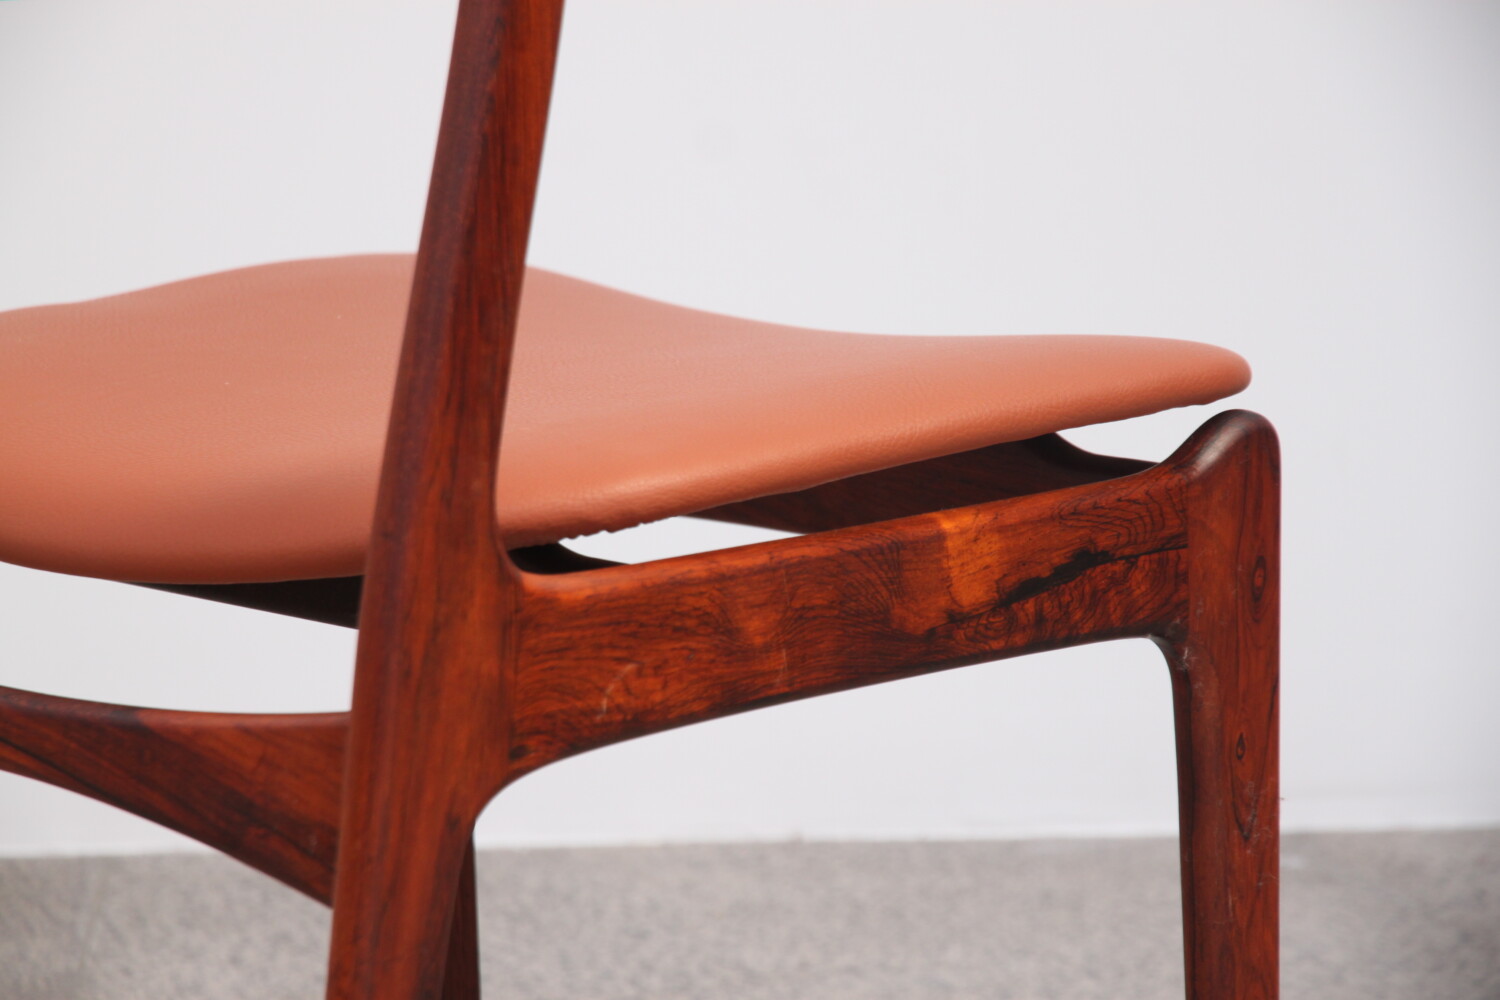 Dining Chairs by P.E Jorgensen